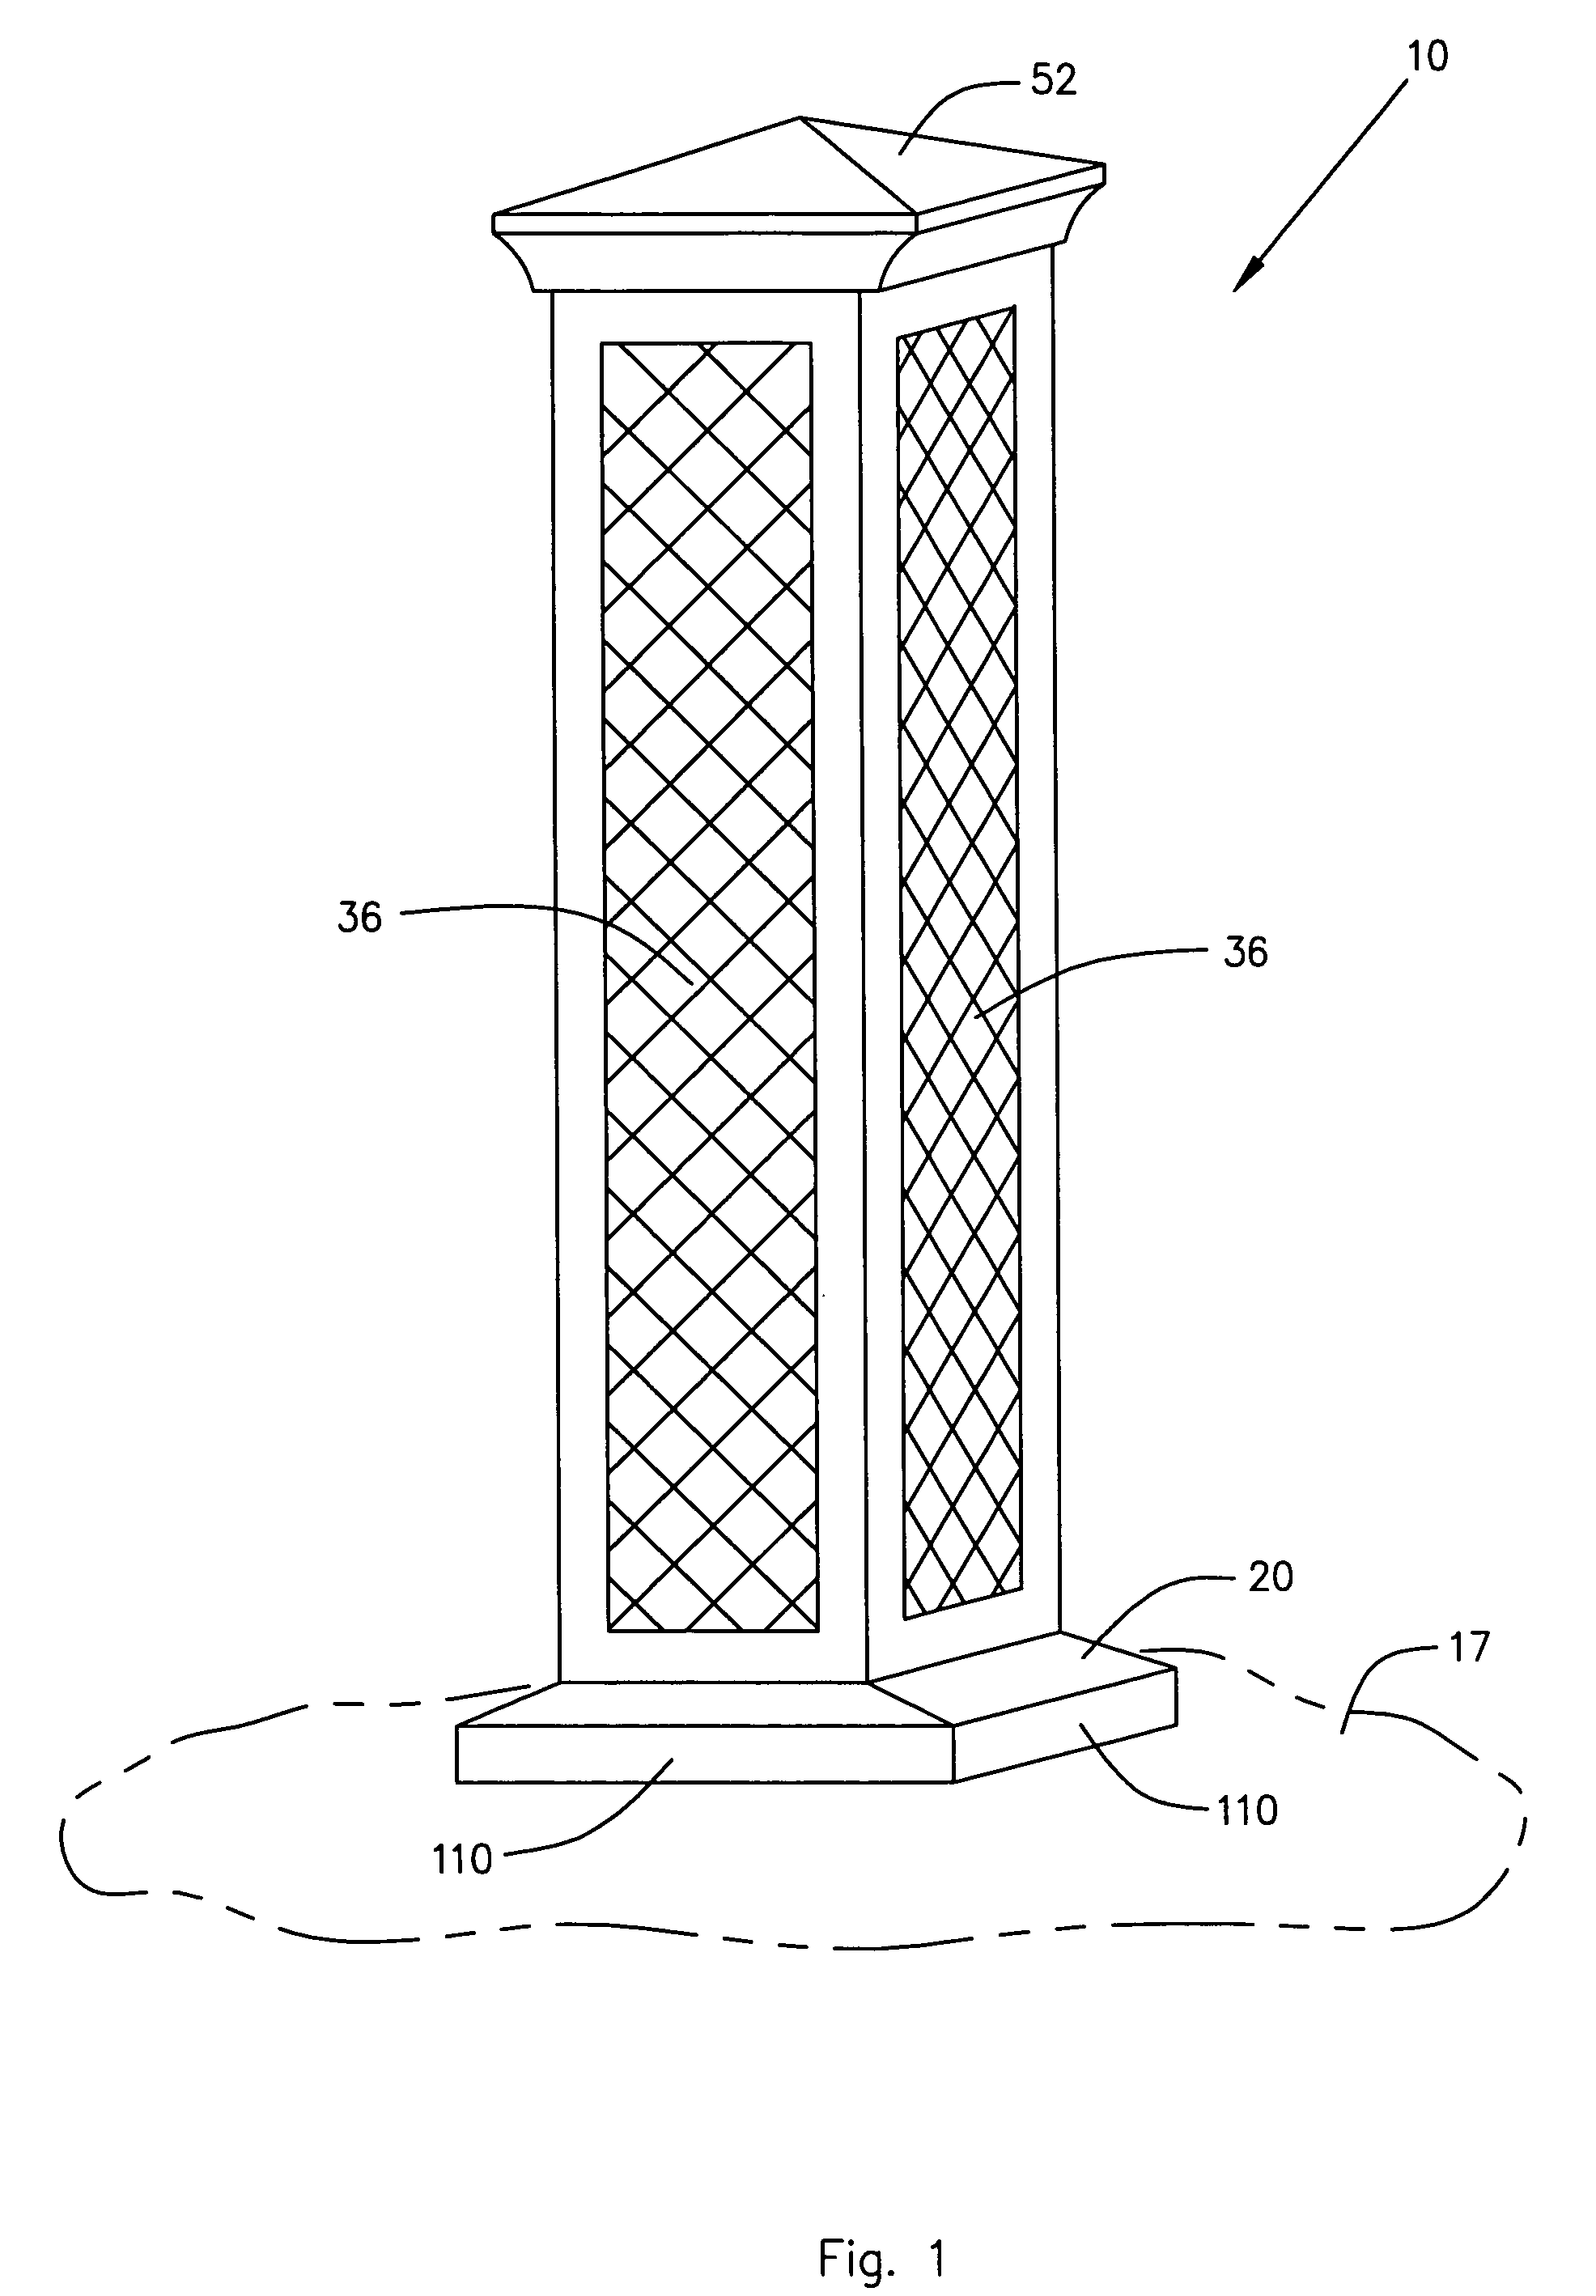 Structural prefabricated column post for securing to the ground